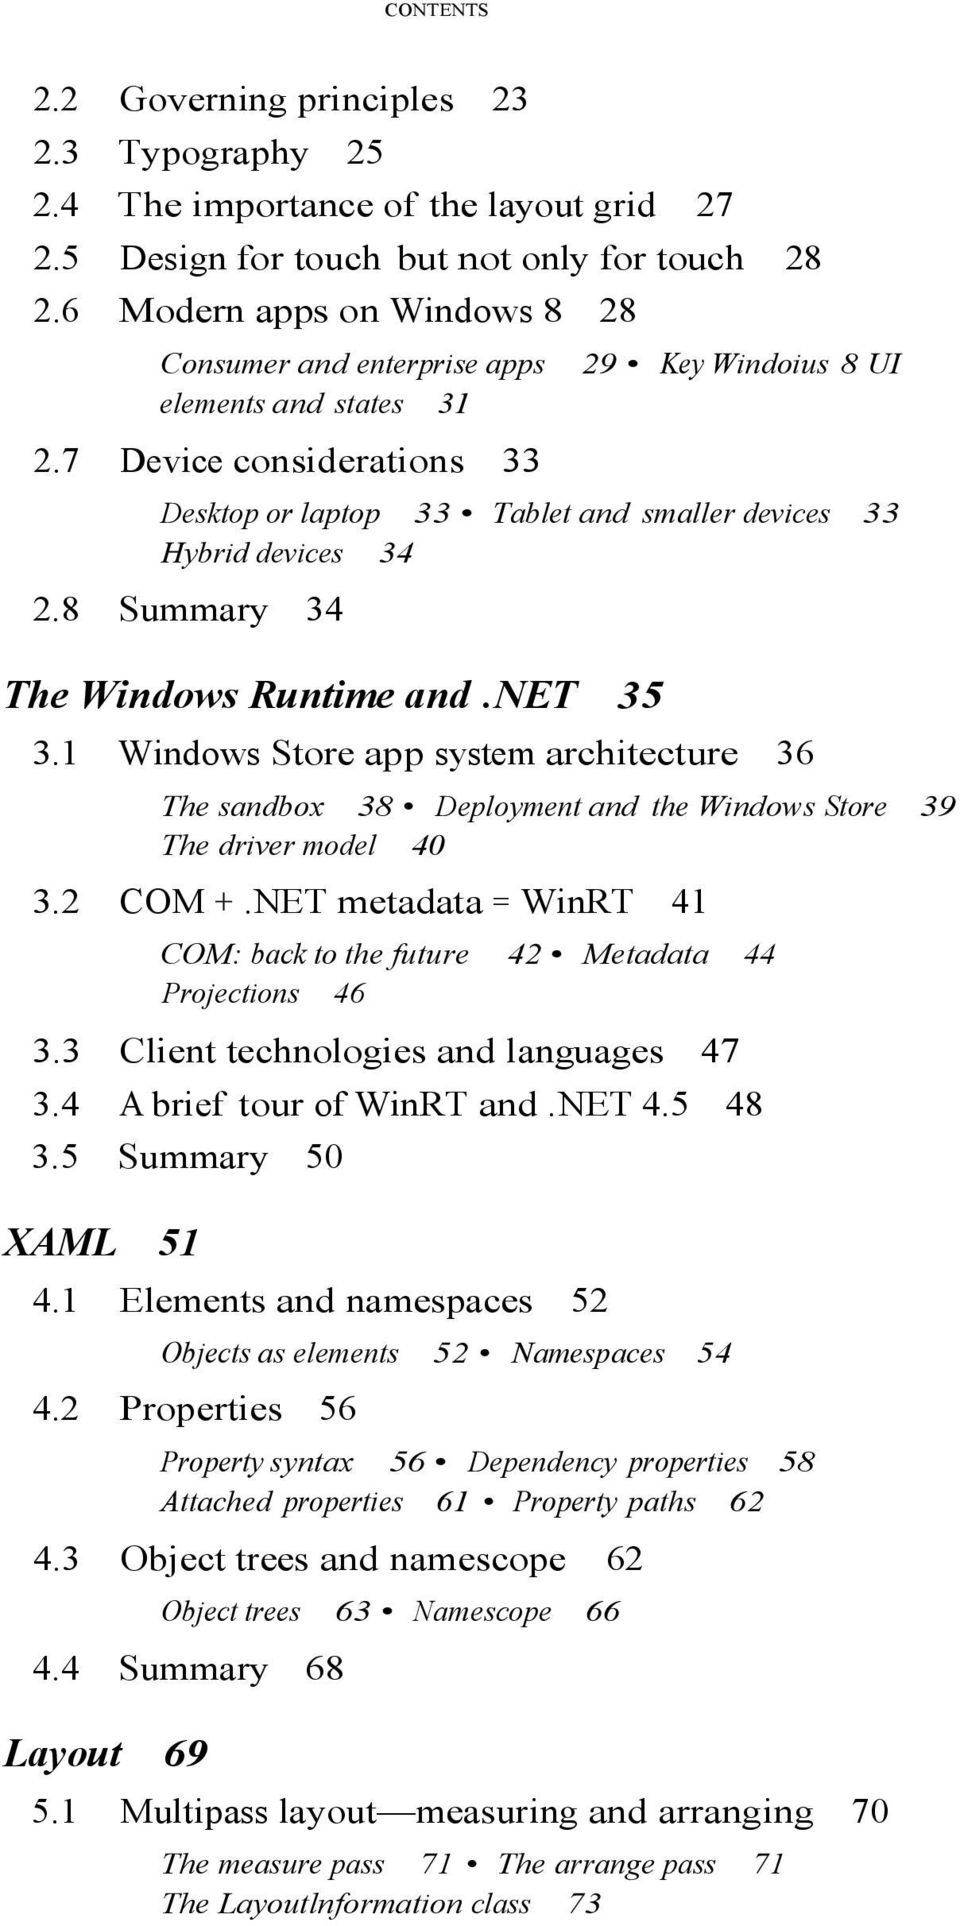 7 Device considerations 33 29 Key Windoius 8 UI Desktop or laptop 33 Tablet and smaller devices 33 Hybrid devices 34 2.8 Summary 34 The Windows Runtime and.net 35 3.